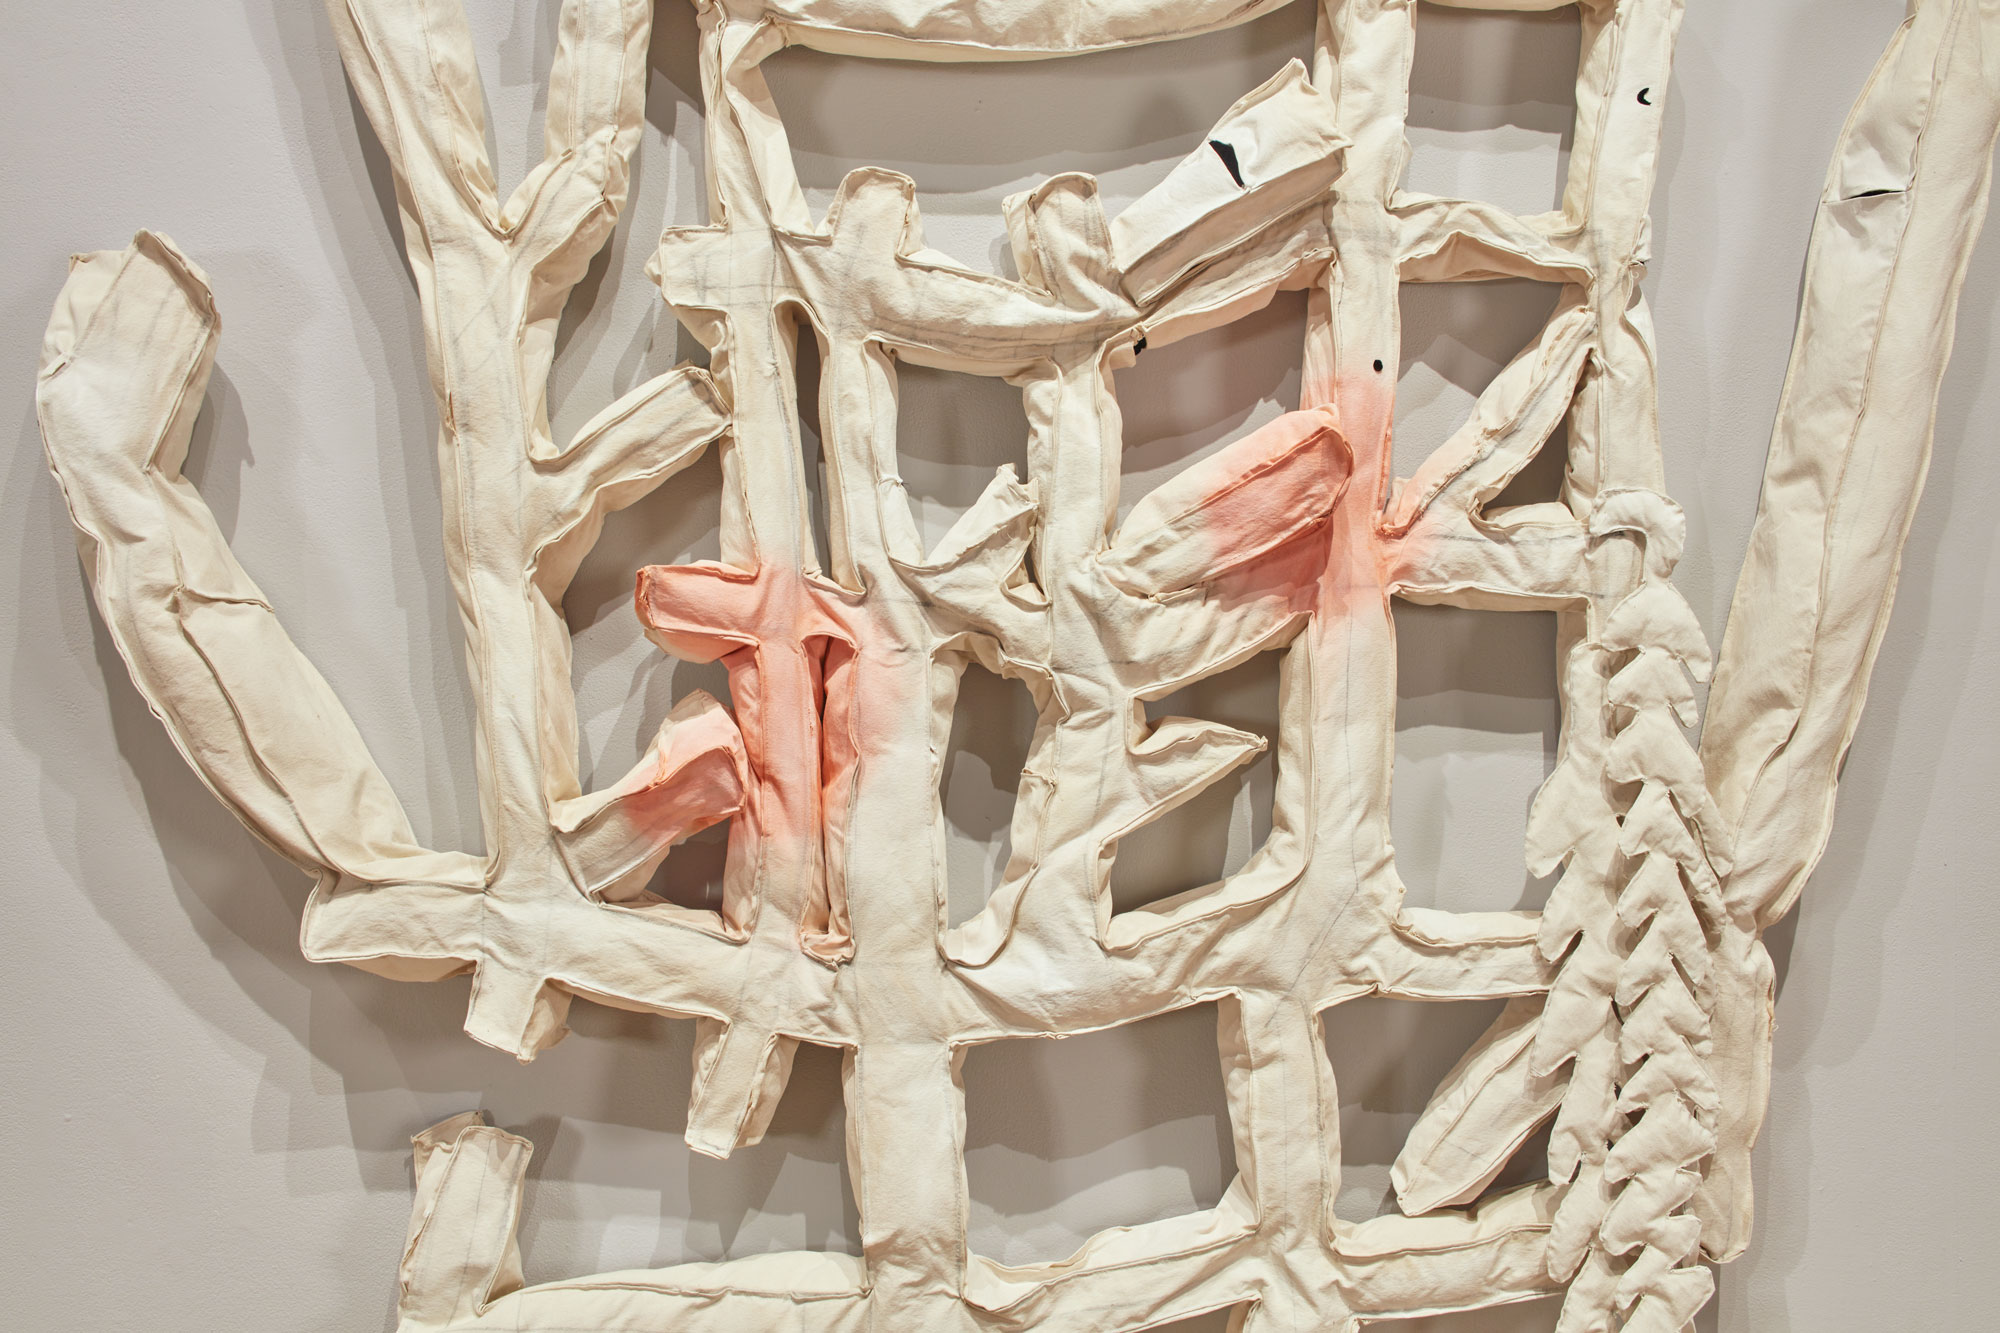 Cynthia Mason, Limp Aristocratic Grid with Arms (detail), 2020. shredded documents, polyester fiber, velvet, charcoal, soft pastel, gesso, grommets, thread, canvas. 92 x 82 x 18 in. Courtesy of the artist. Installation view of Skyway 20/21 exhibition at USF Contemporary Art Museum. Photo: Will Lytch.